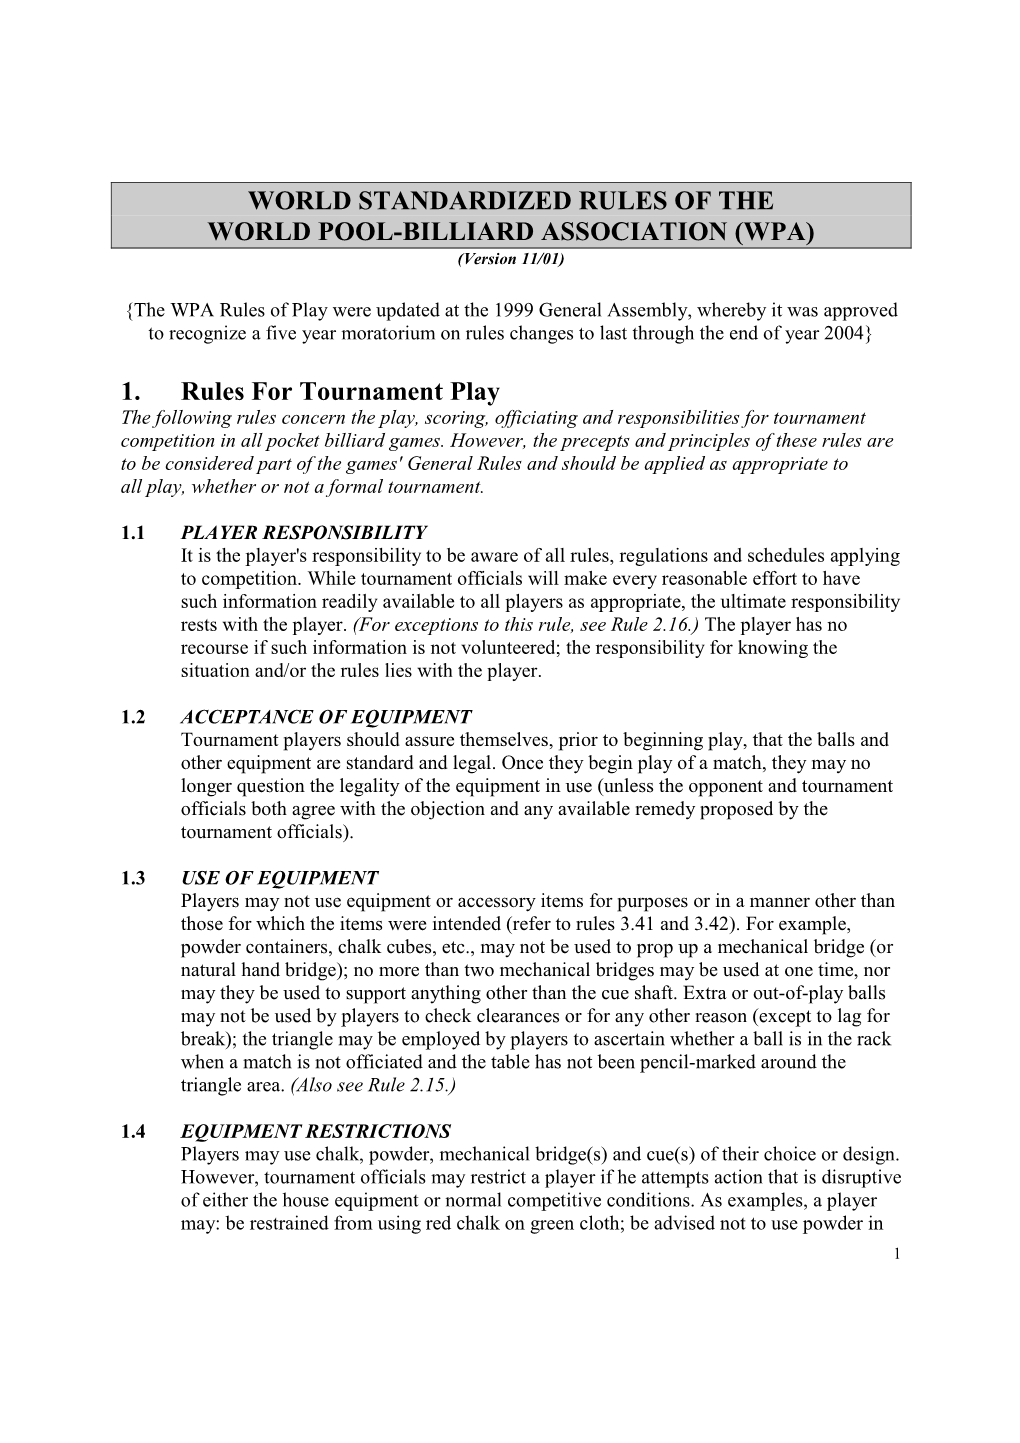 WORLD STANDARDIZED RULES of the WORLD POOL-BILLIARD ASSOCIATION (WPA) 1. Rules for Tournament Play